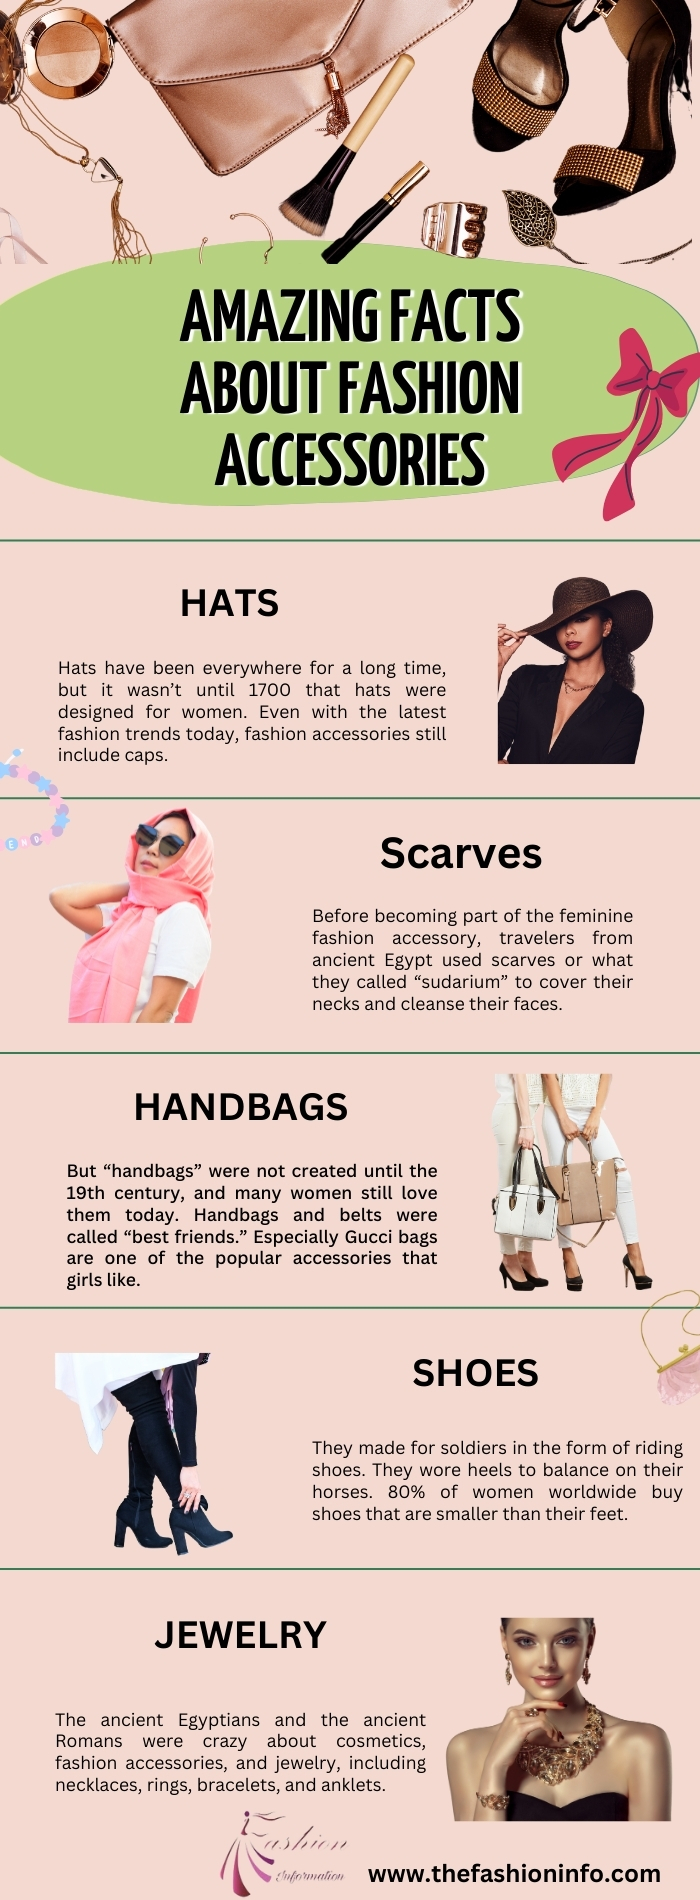 Amazing Facts About Fashion Accessories